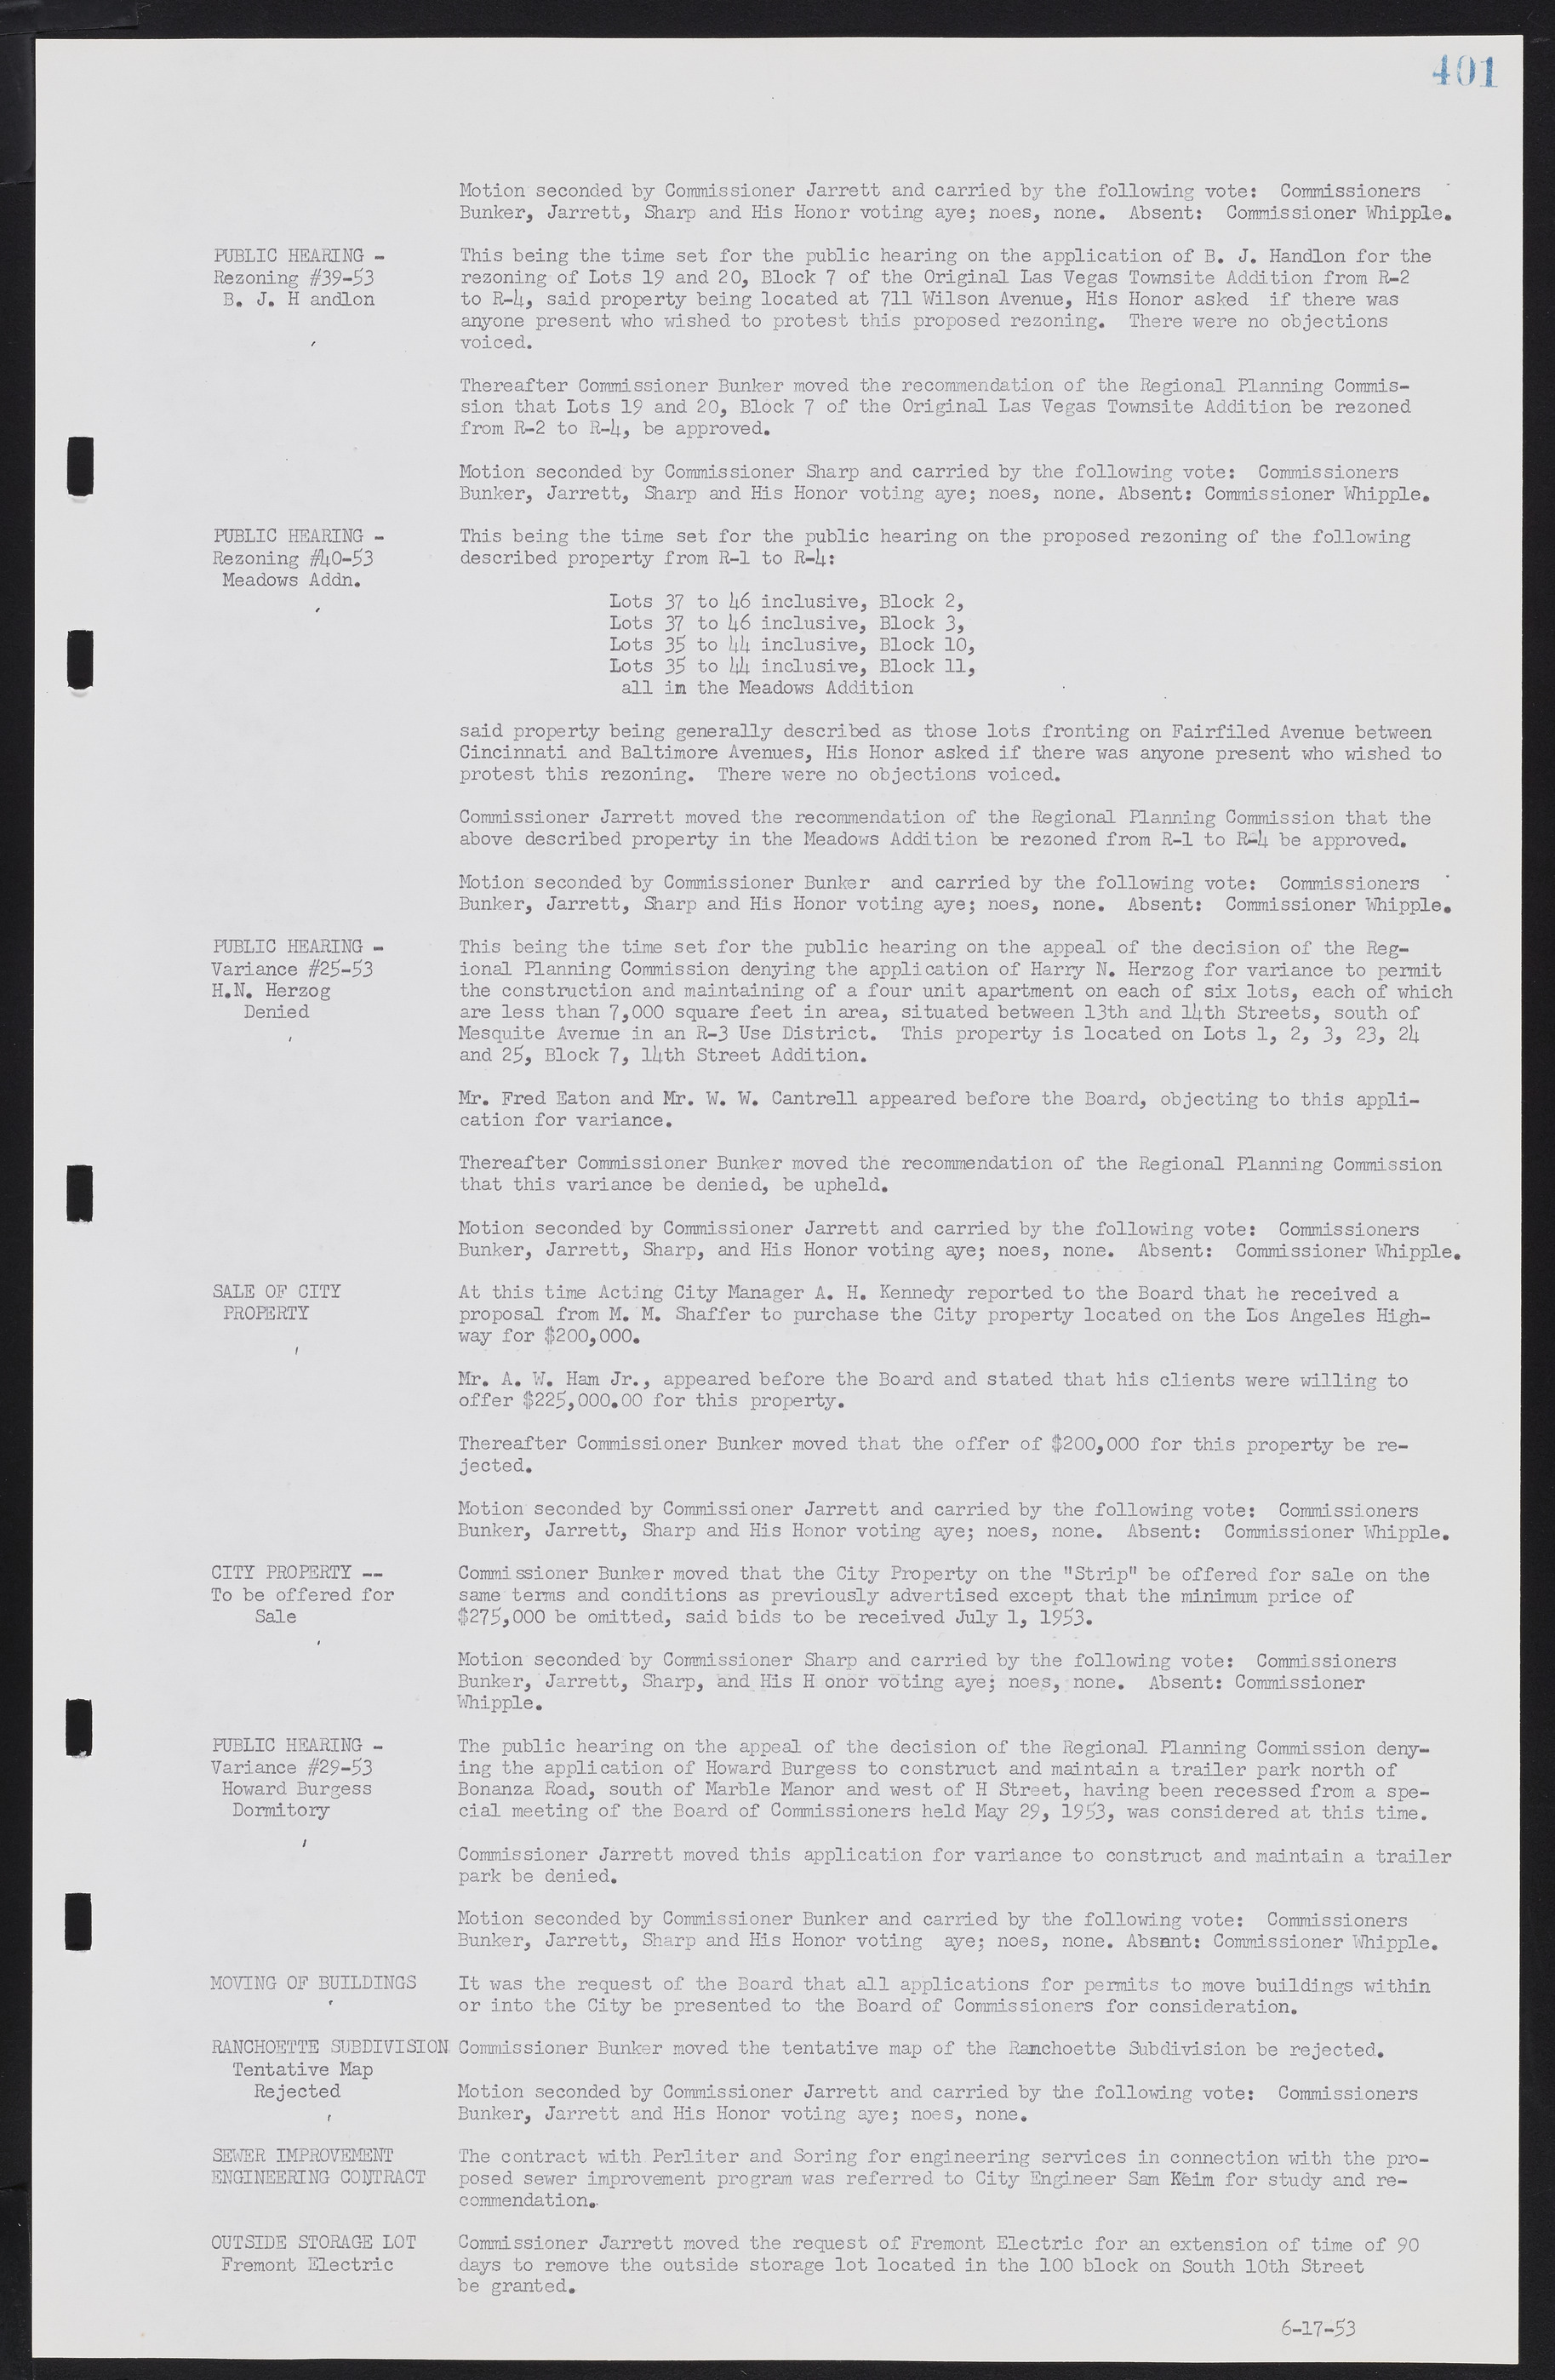 Las Vegas City Commission Minutes, May 26, 1952 to February 17, 1954, lvc000008-429